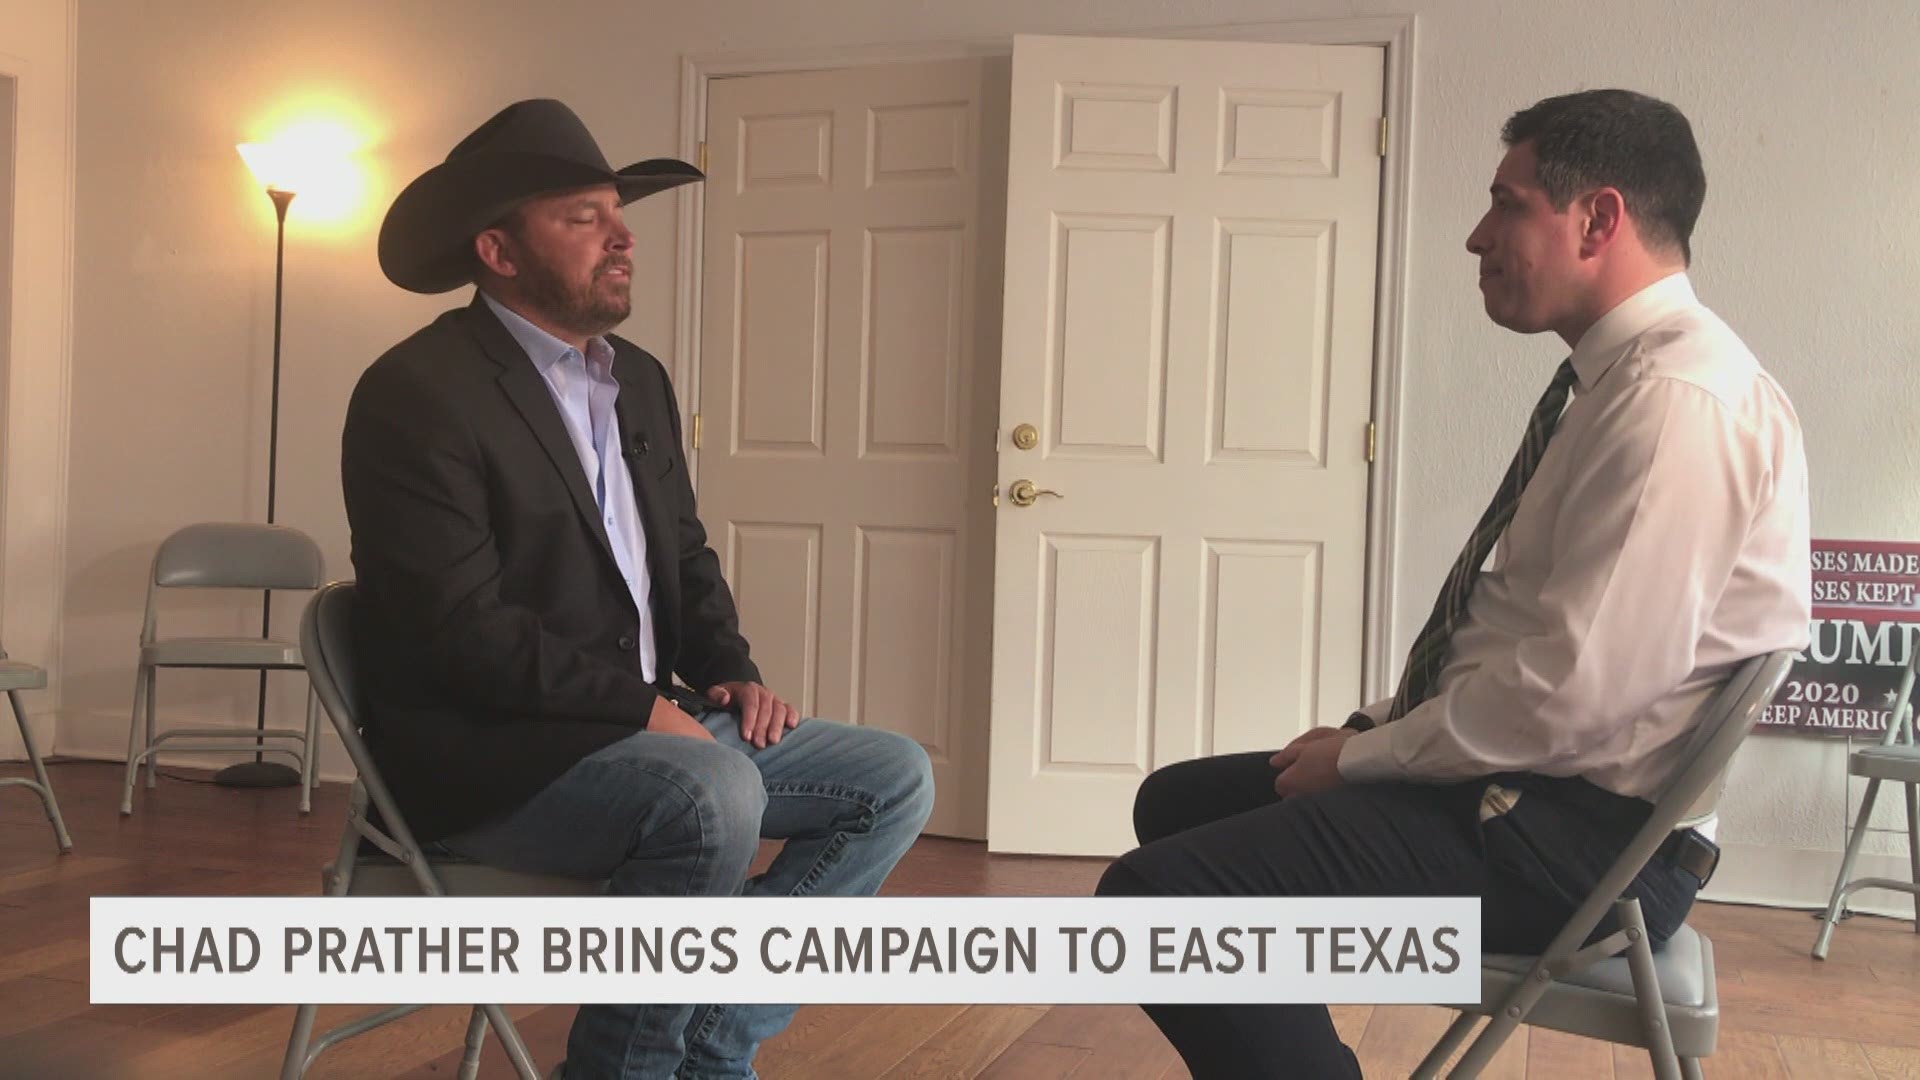 One-on-one with comedian and conservative political commentator Chad Prather about running to replace Texas Gov. Greg Abbott in 2022